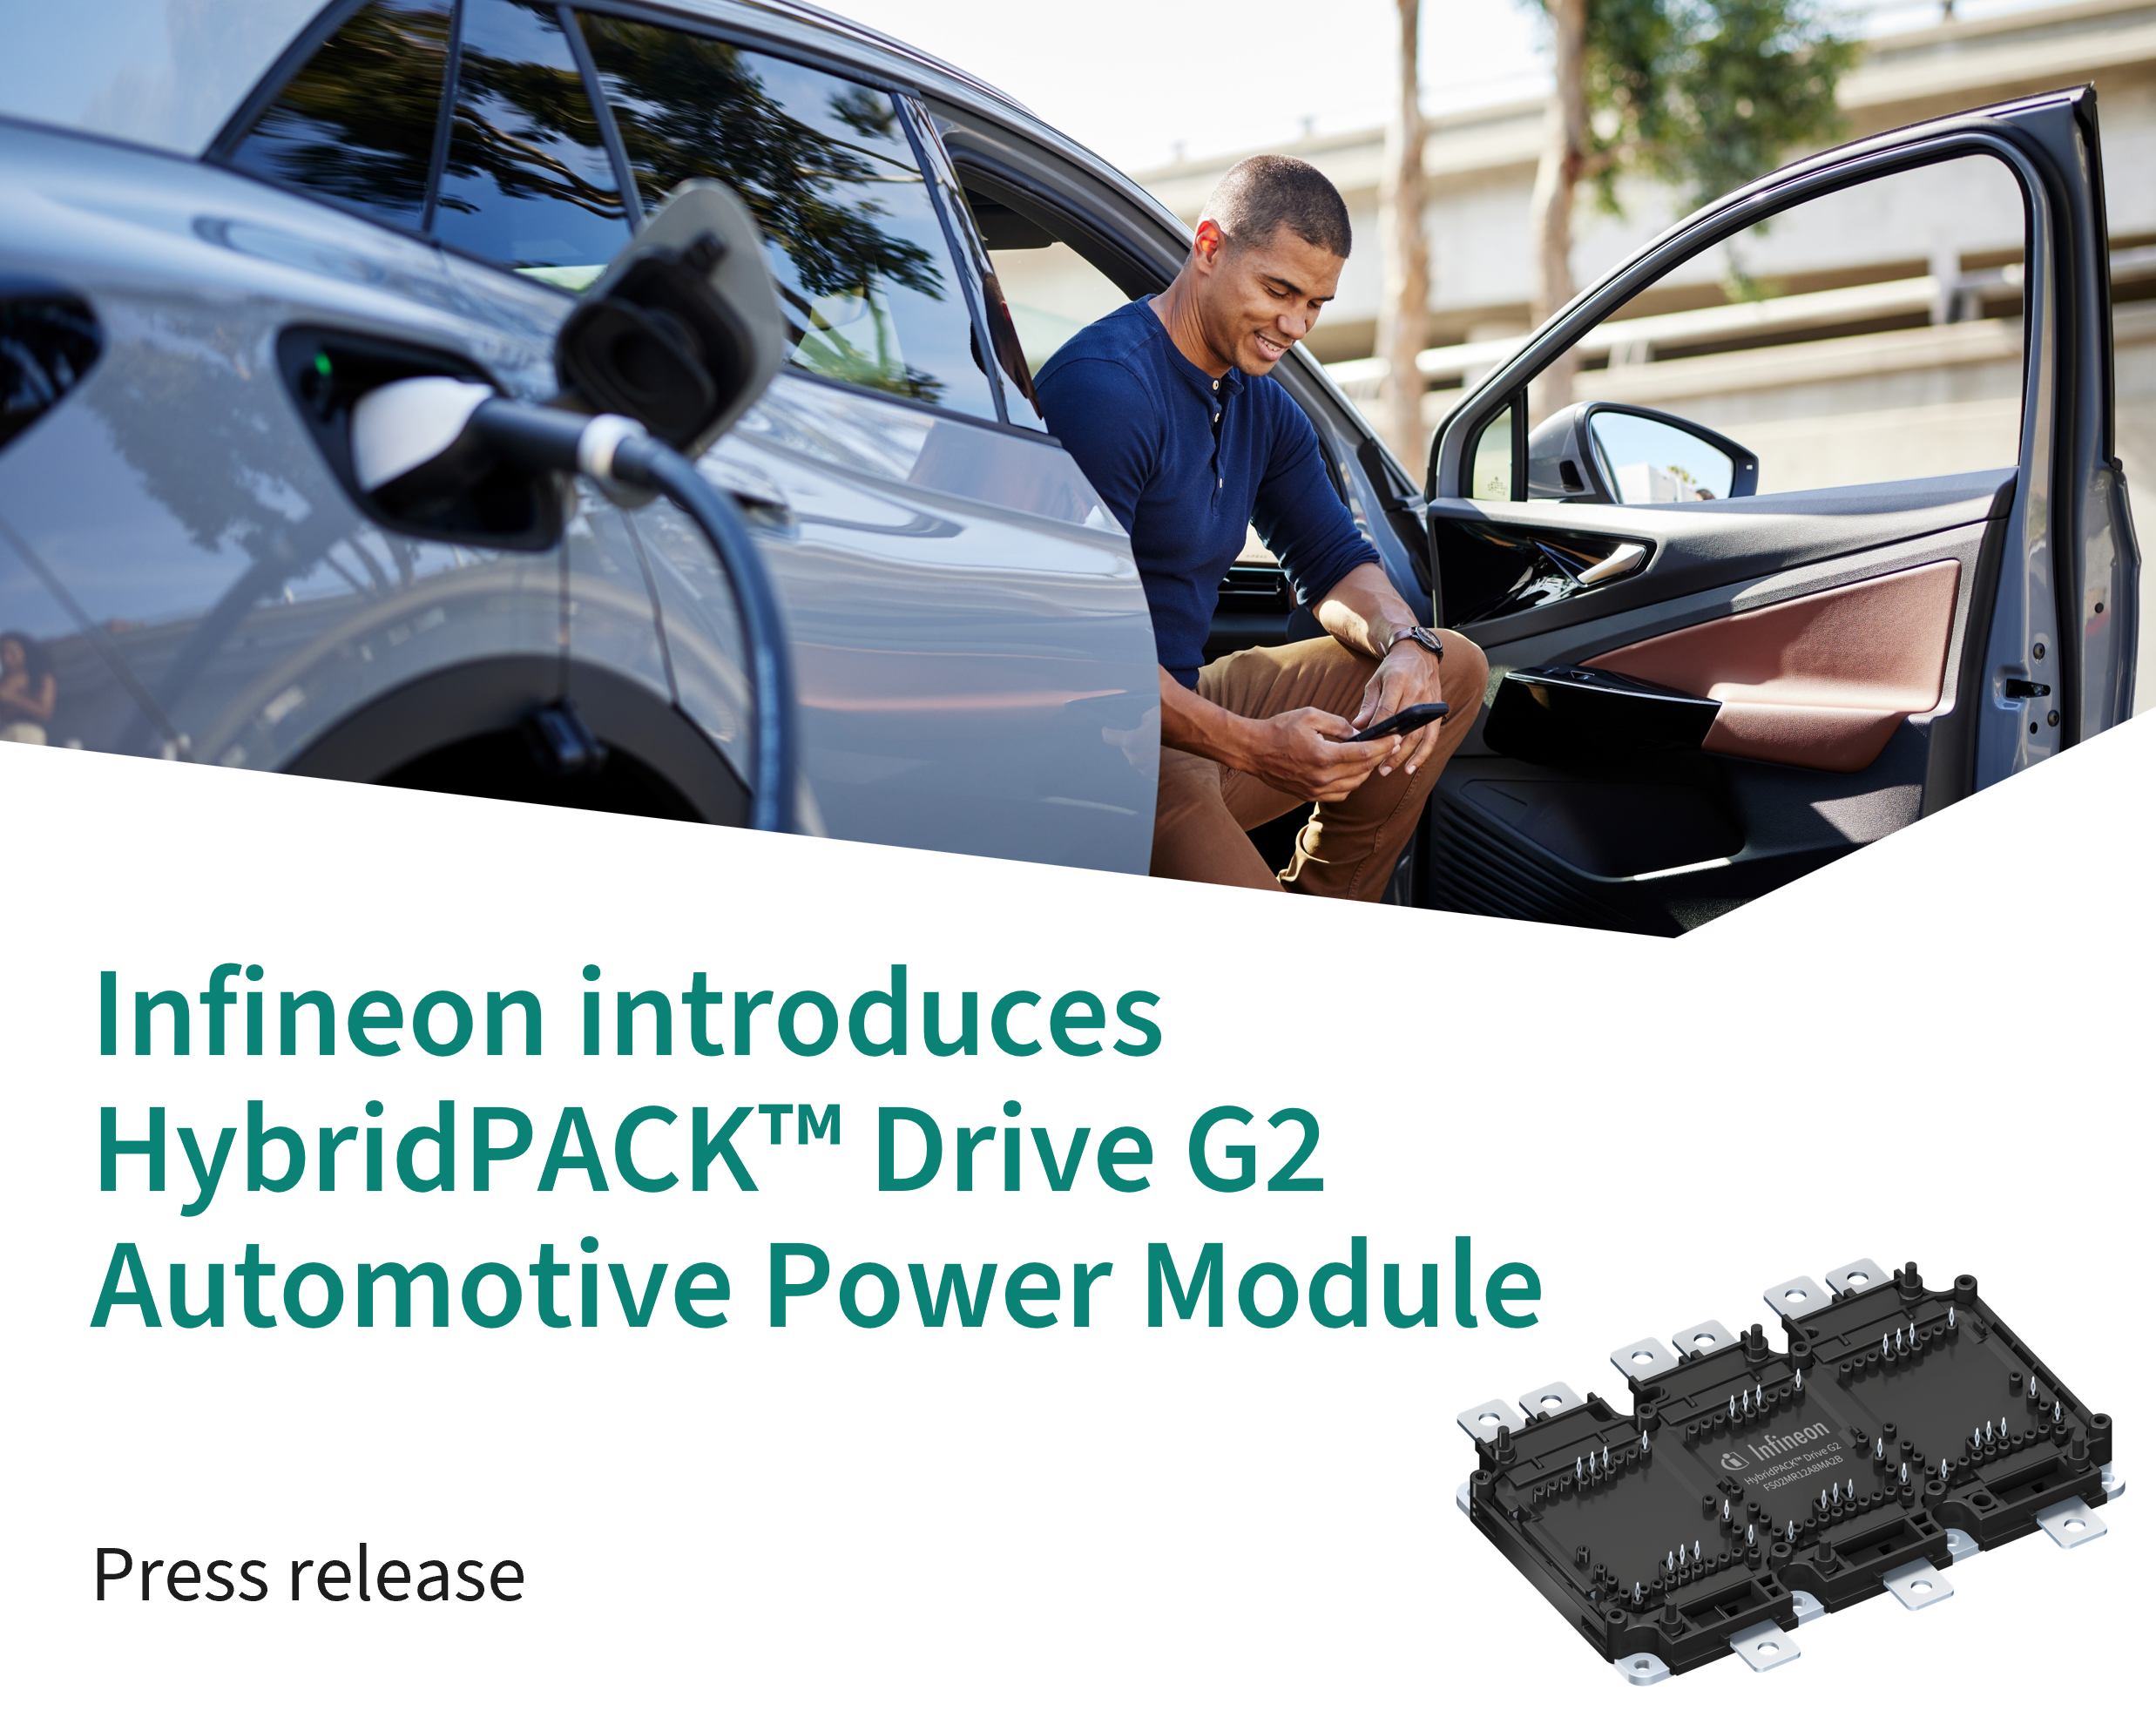 Infineon introduces HybridPACK™ Drive G2